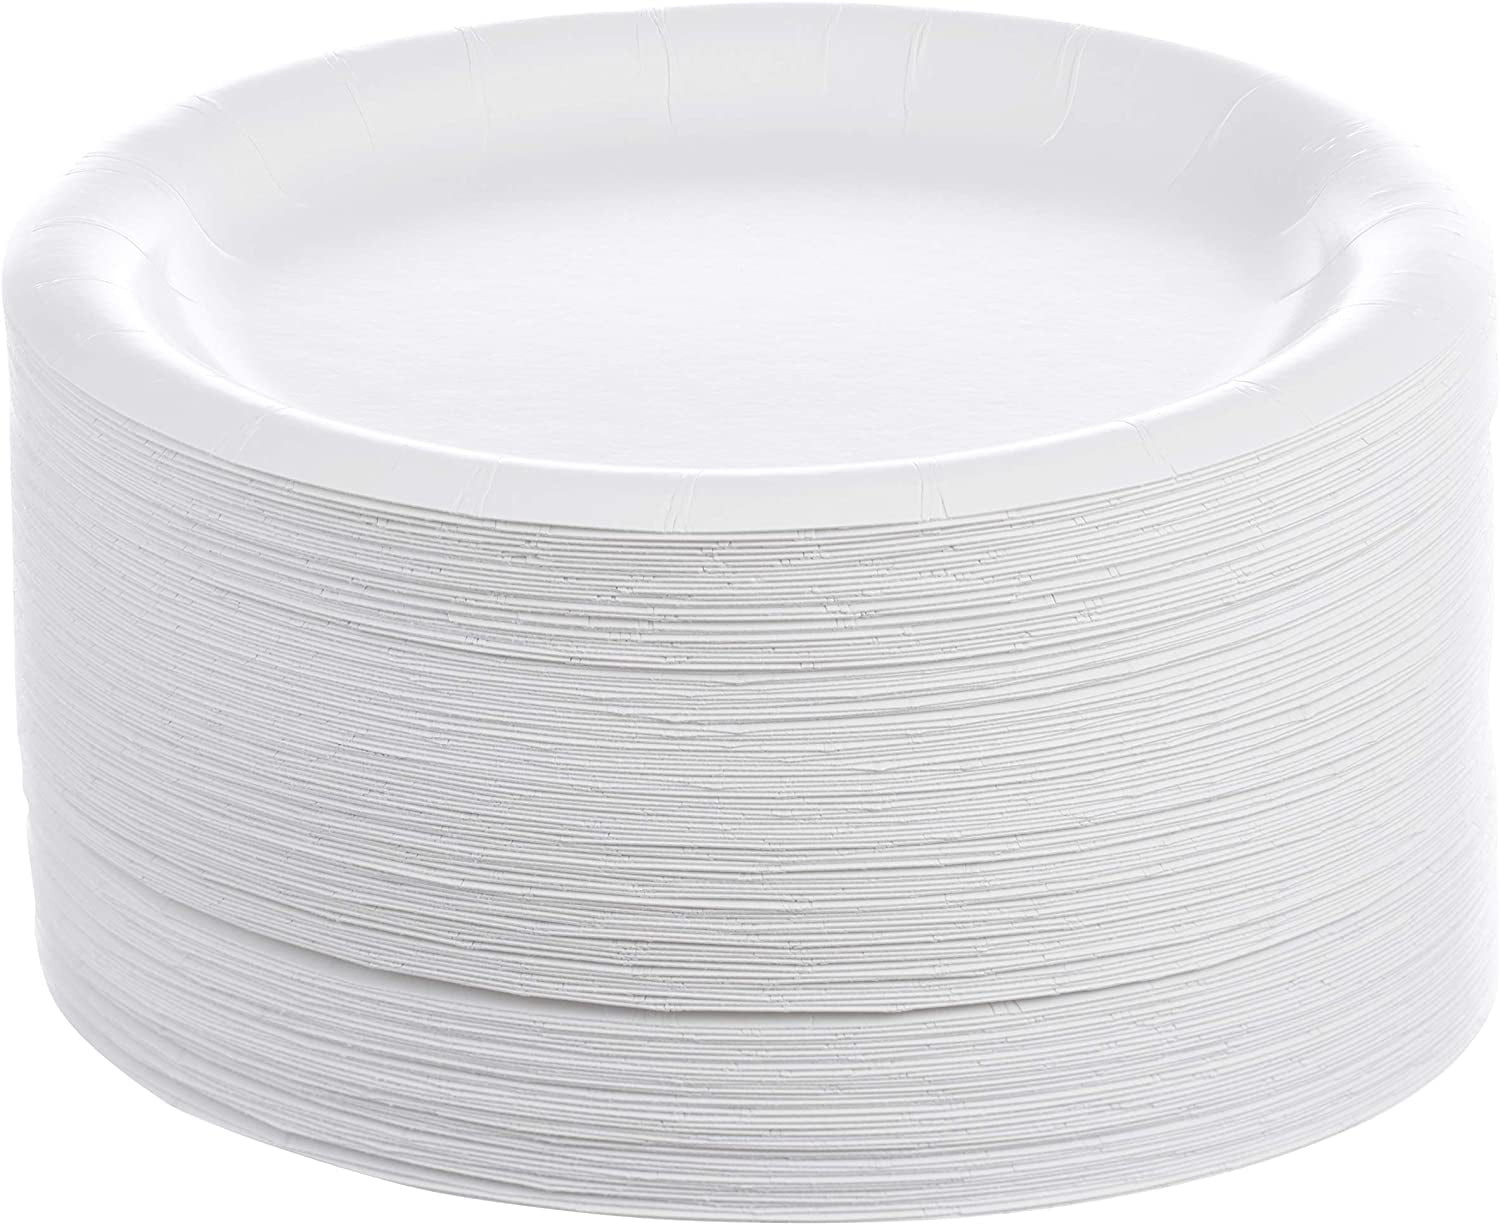 Best Factory Supply 9 Inch Paper Plates Bulk - Disposable White Round 7  Inch Paper Plate – Lenkin Manufacturer and Factory